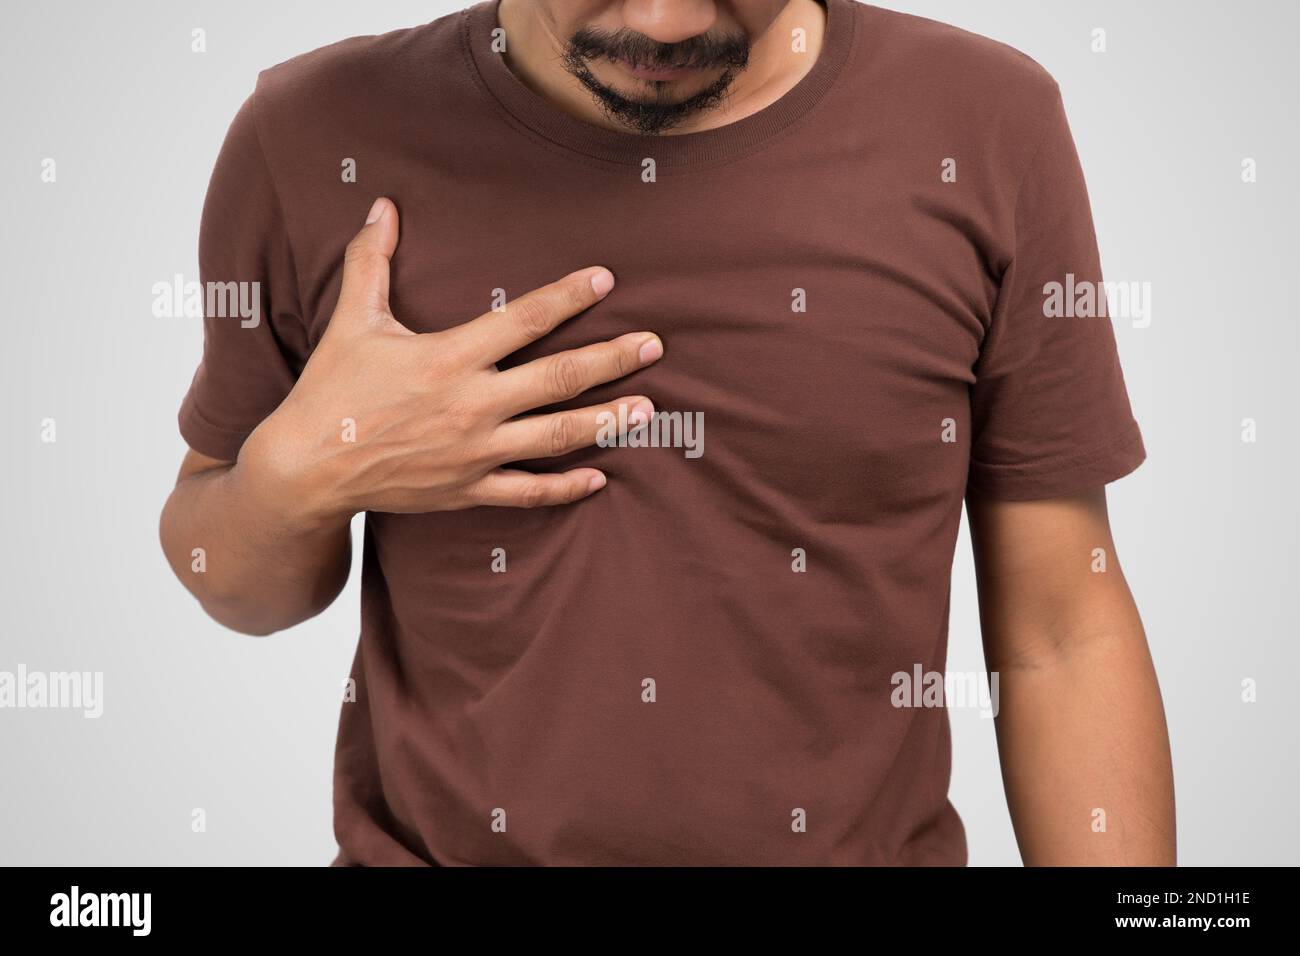 Asian man suffering from gastritis on gray background. Stock Photo